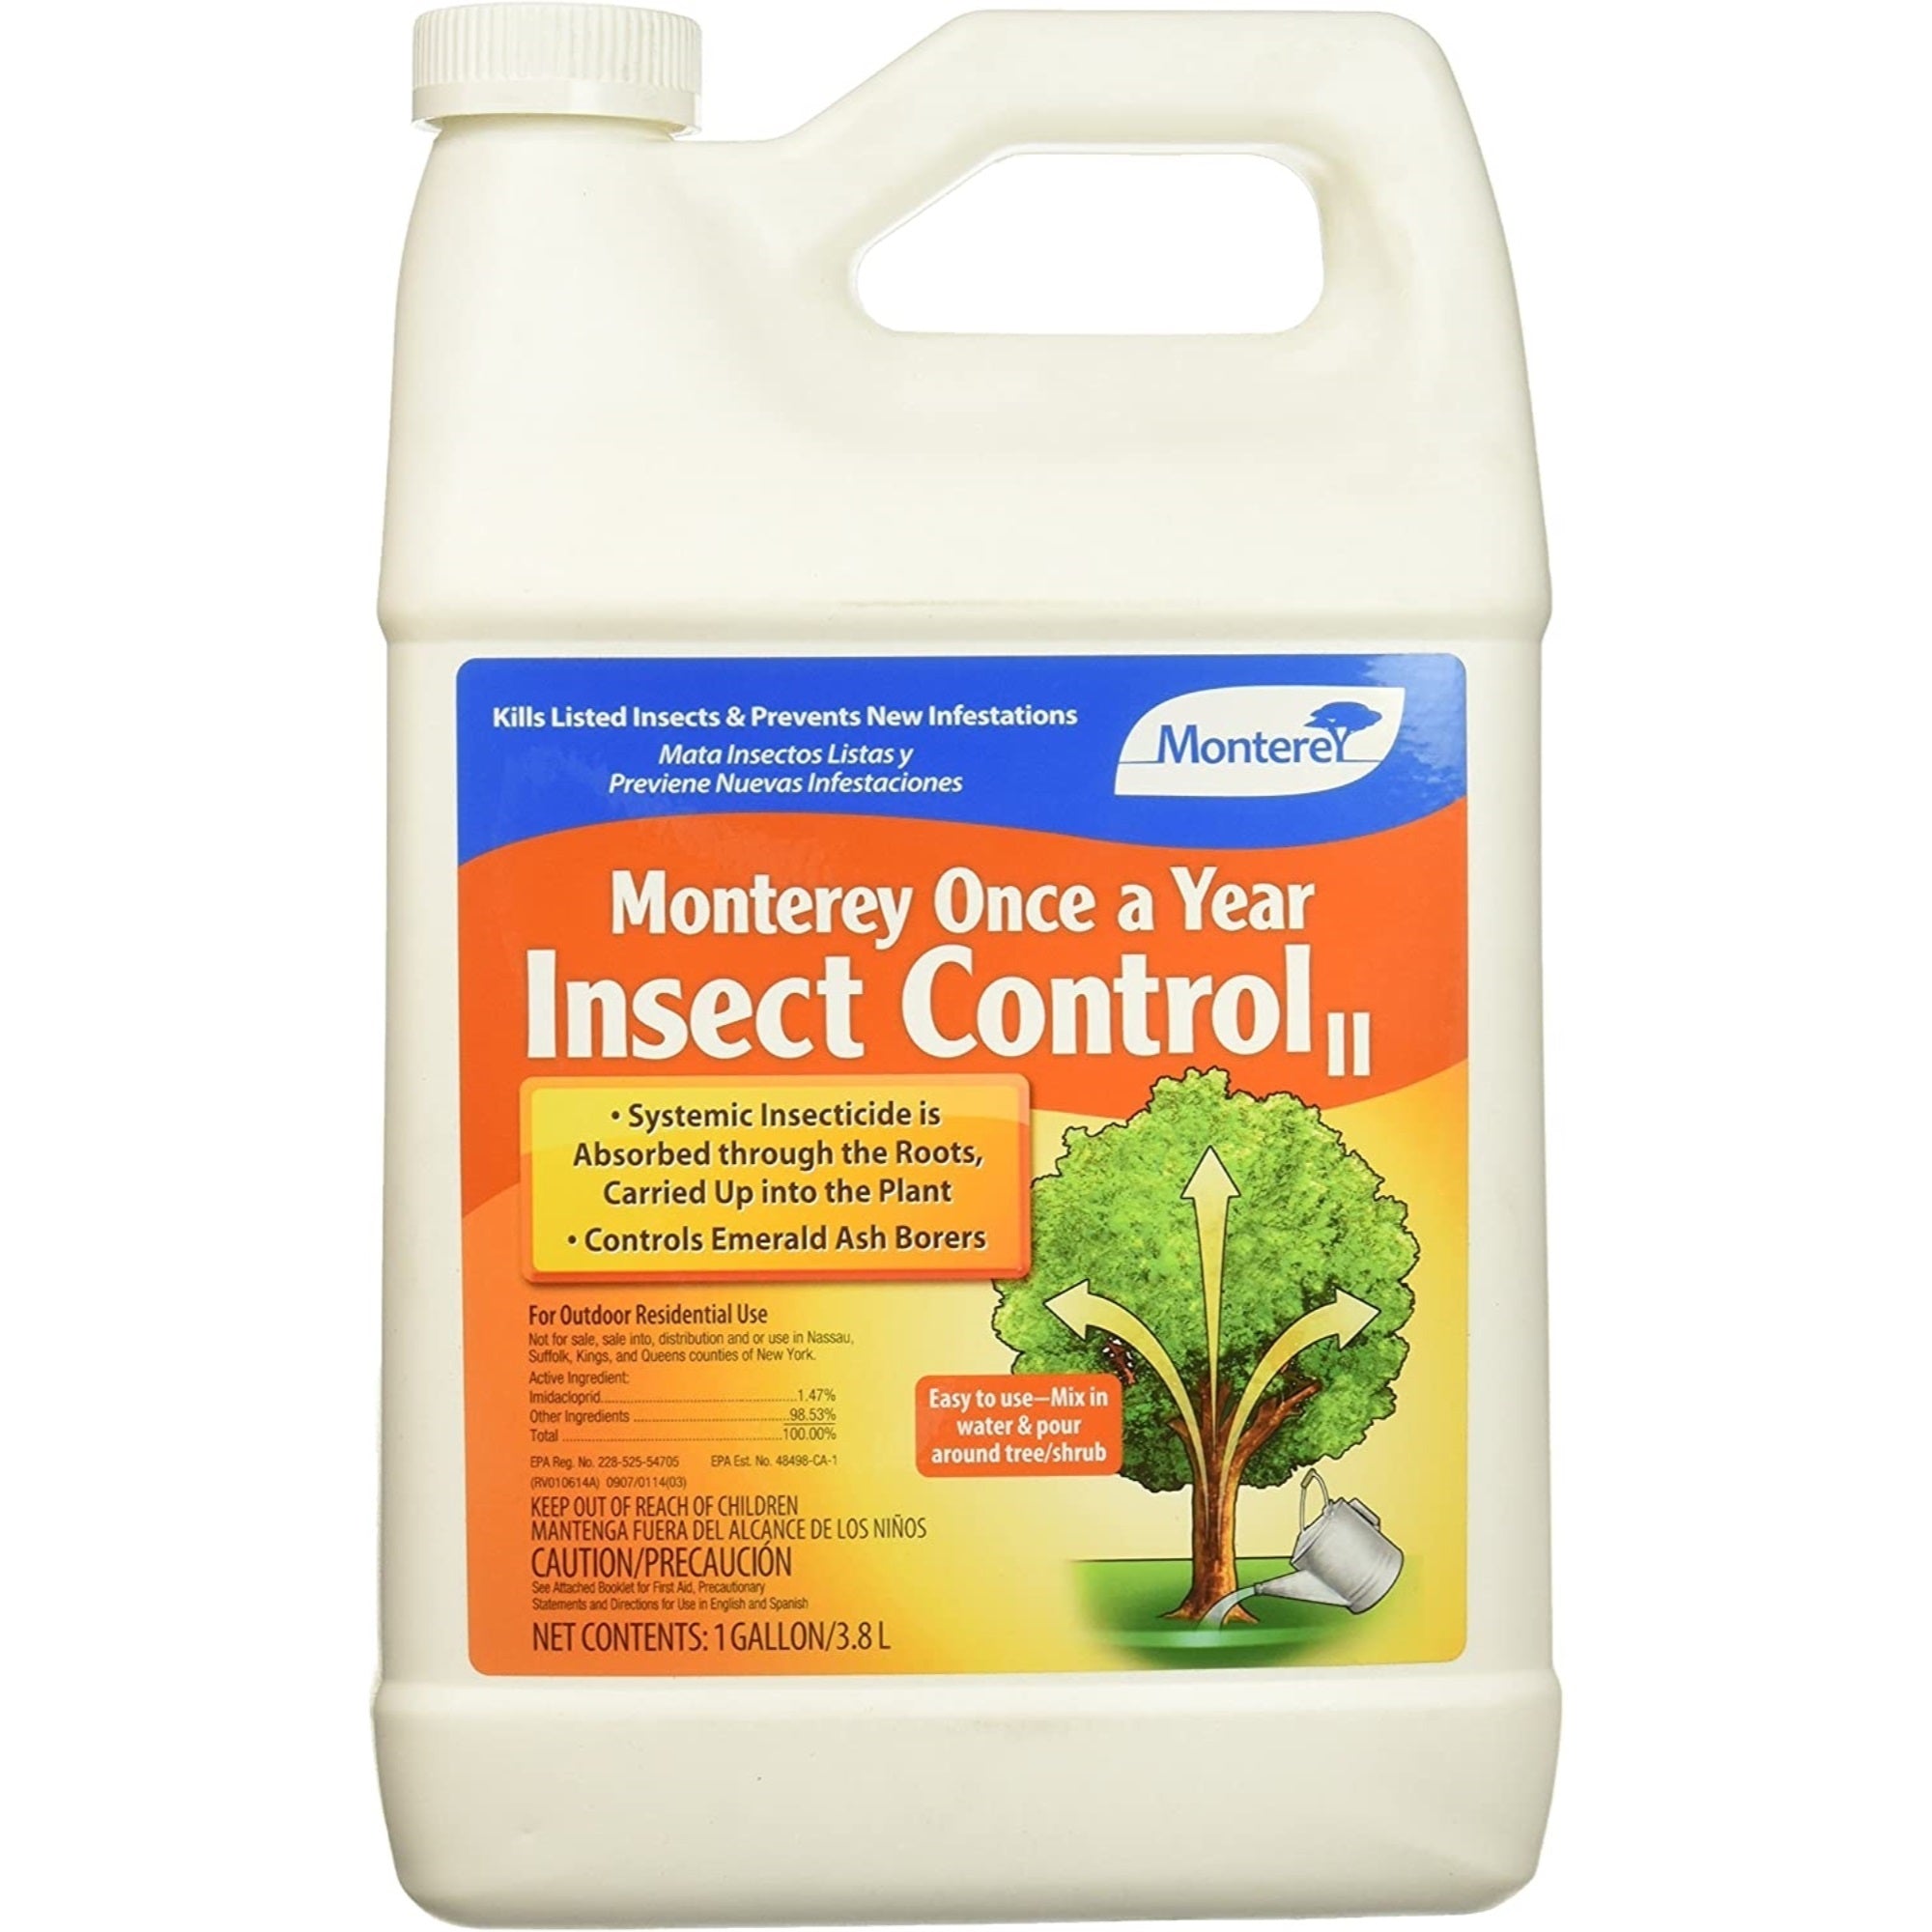 Monterey Once A Year Insect Control Systemic Insect Treatment Concentrate, 1 Gallon